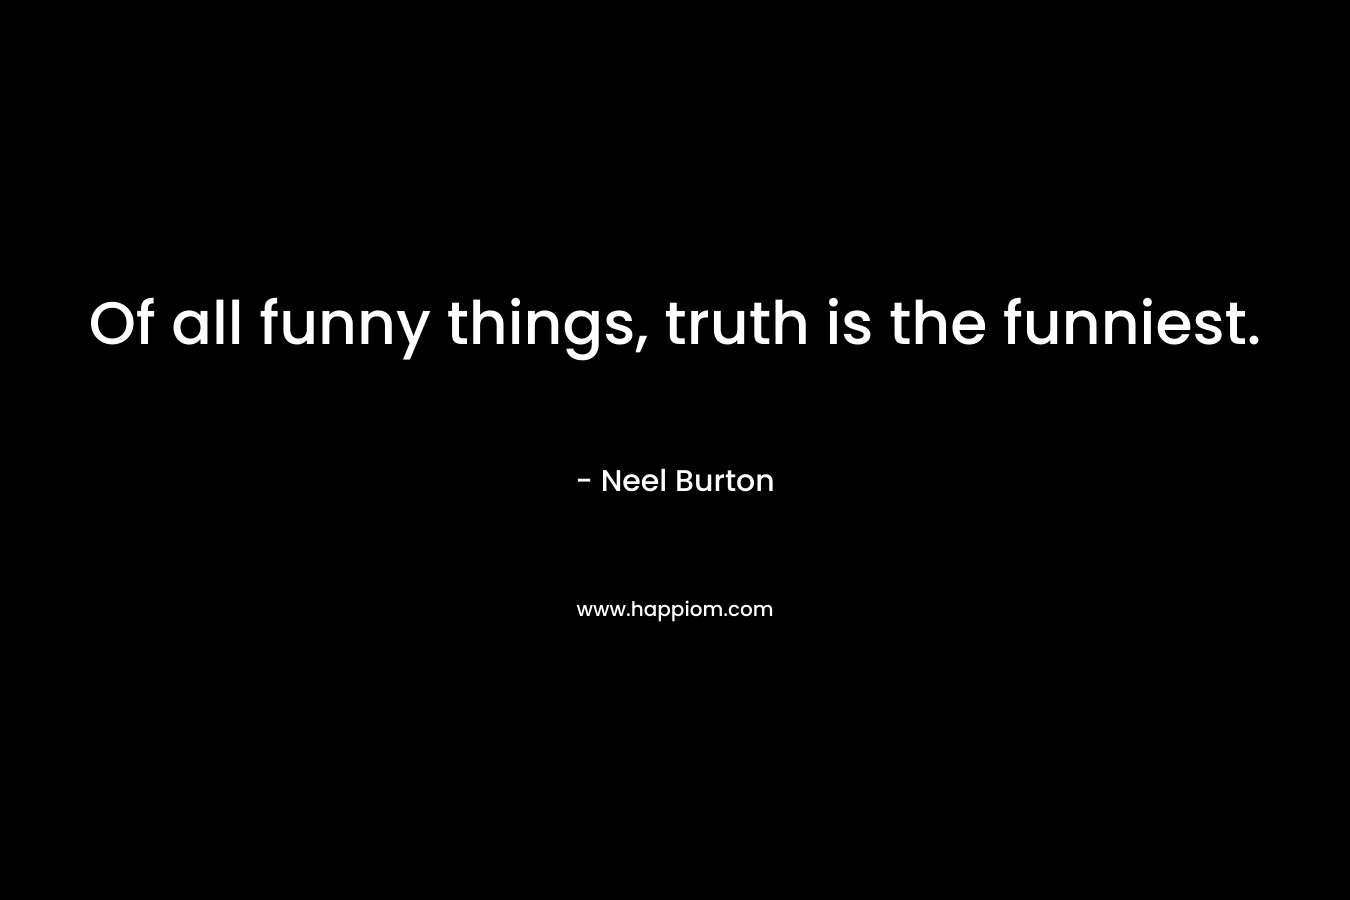 Of all funny things, truth is the funniest.